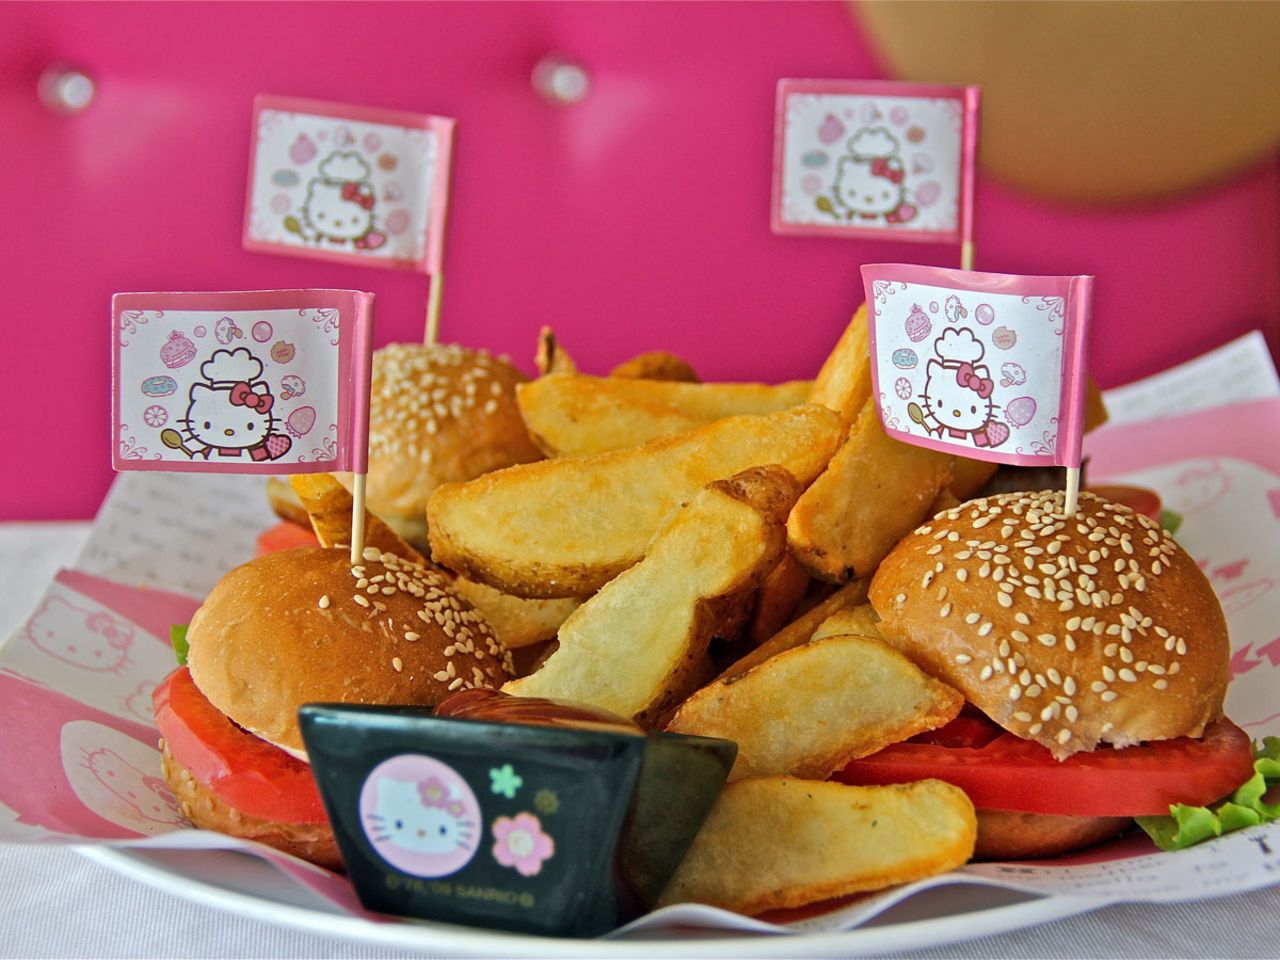 A Hello Kitty Dreams best-seller, the mini burgers come four to a plate with a choice of fillings: beef, chicken, fish and tomato and mozzarella.